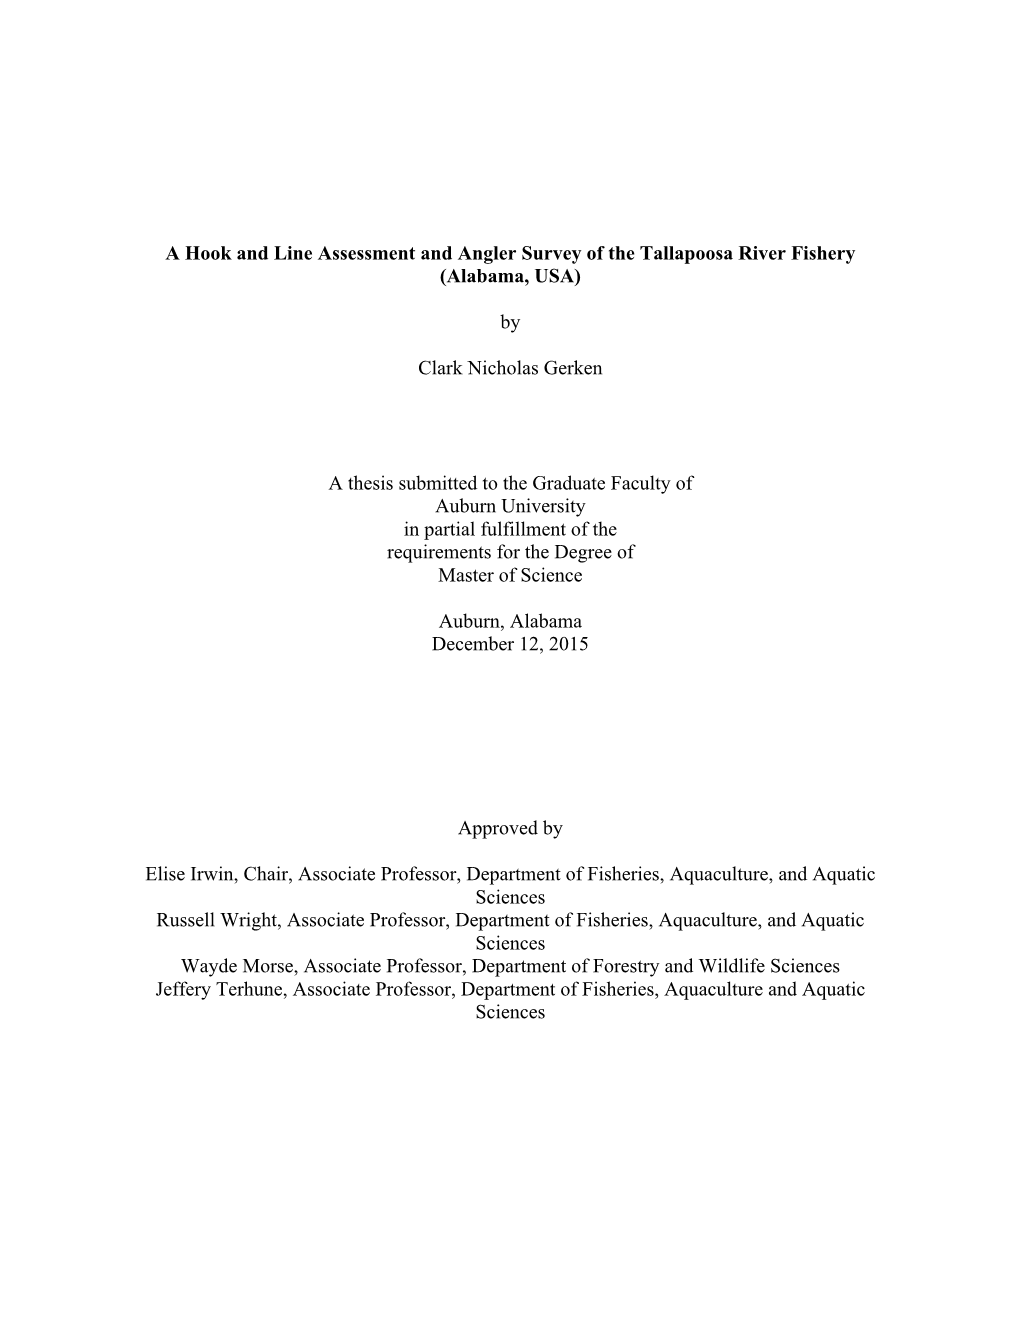 A Hook and Line Assessment and Angler Survey of the Tallapoosa River Fishery (Alabama, USA) by Clark Nicholas Gerken a Thesis Su